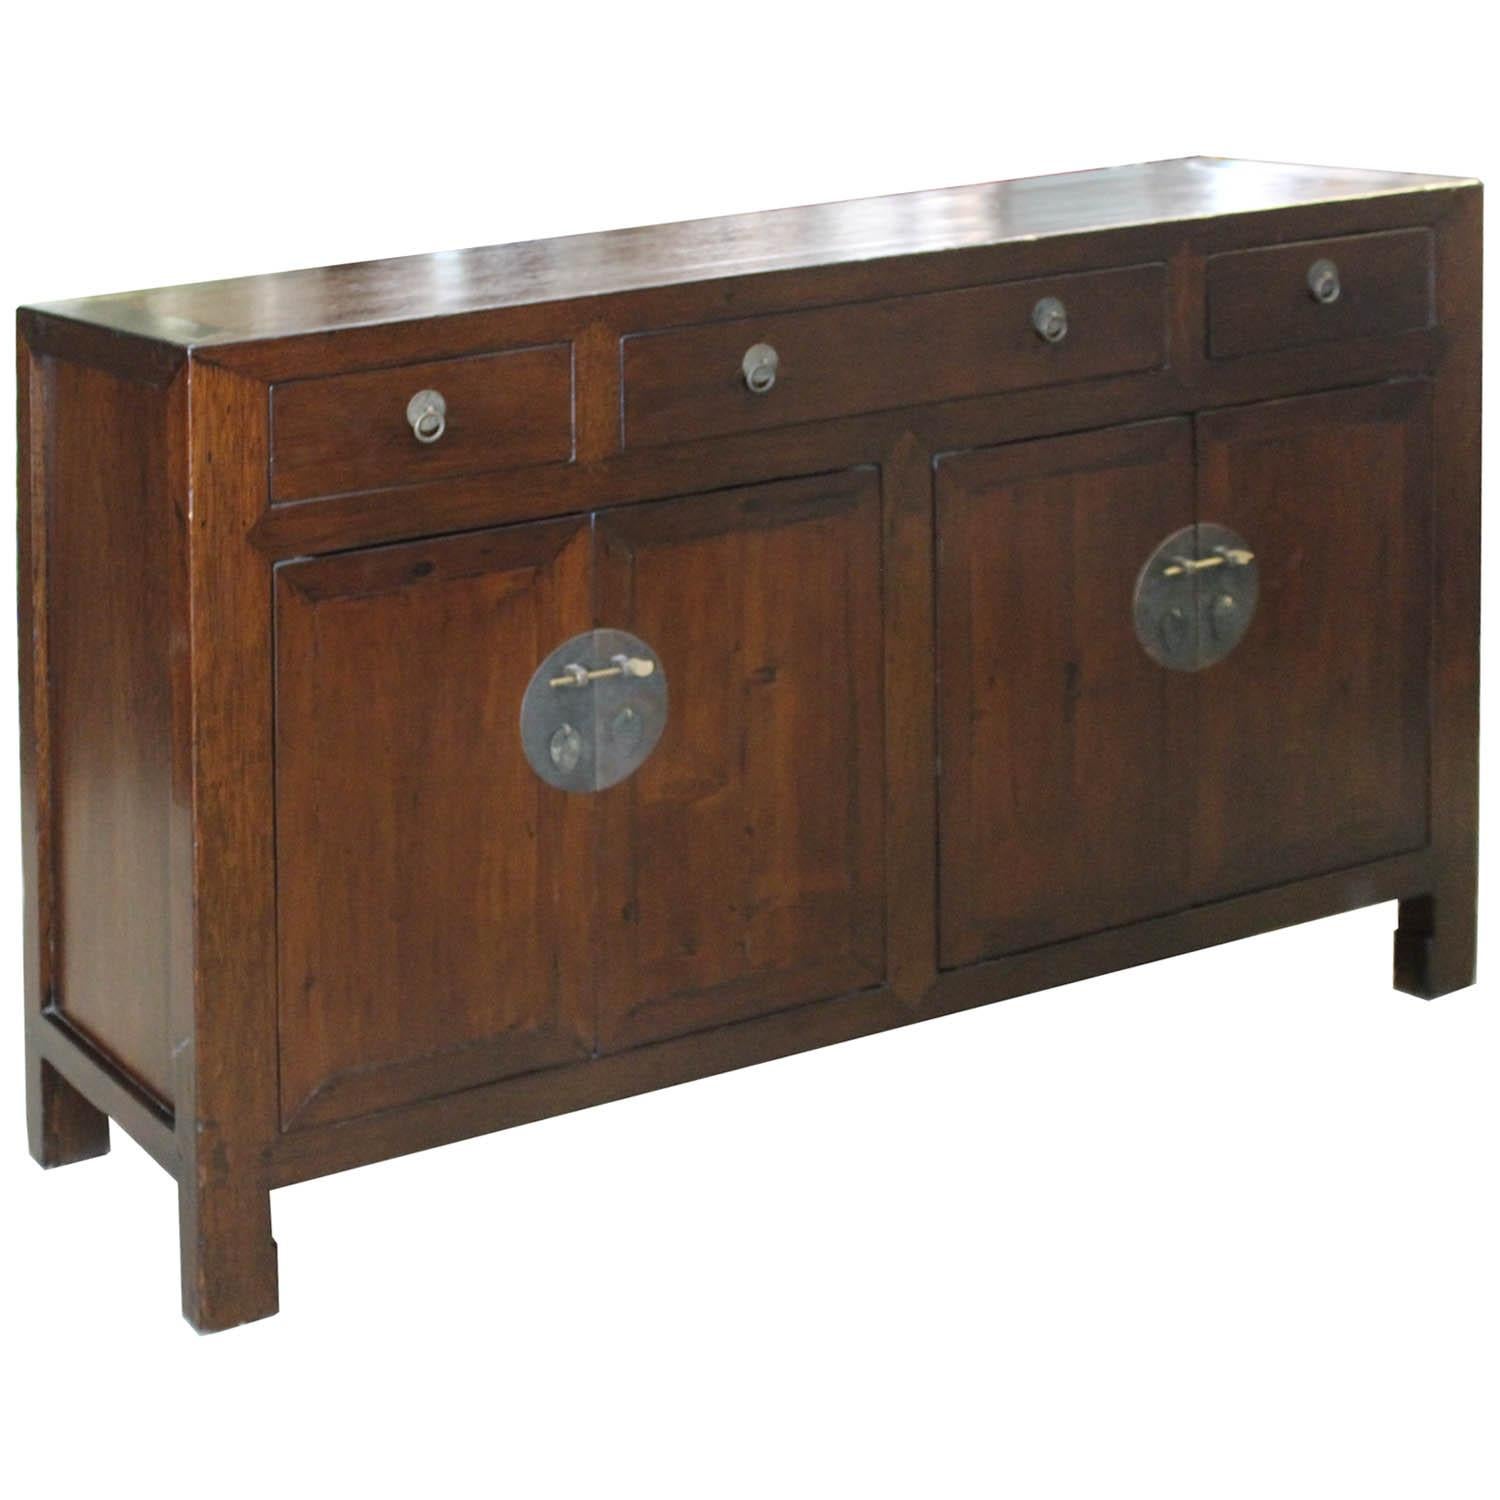 Classic four-drawer walnut wood sideboard with two sets of doors. Place in the living room beneath a flat screen tv or in the dining room. New interior shelf and hardware.